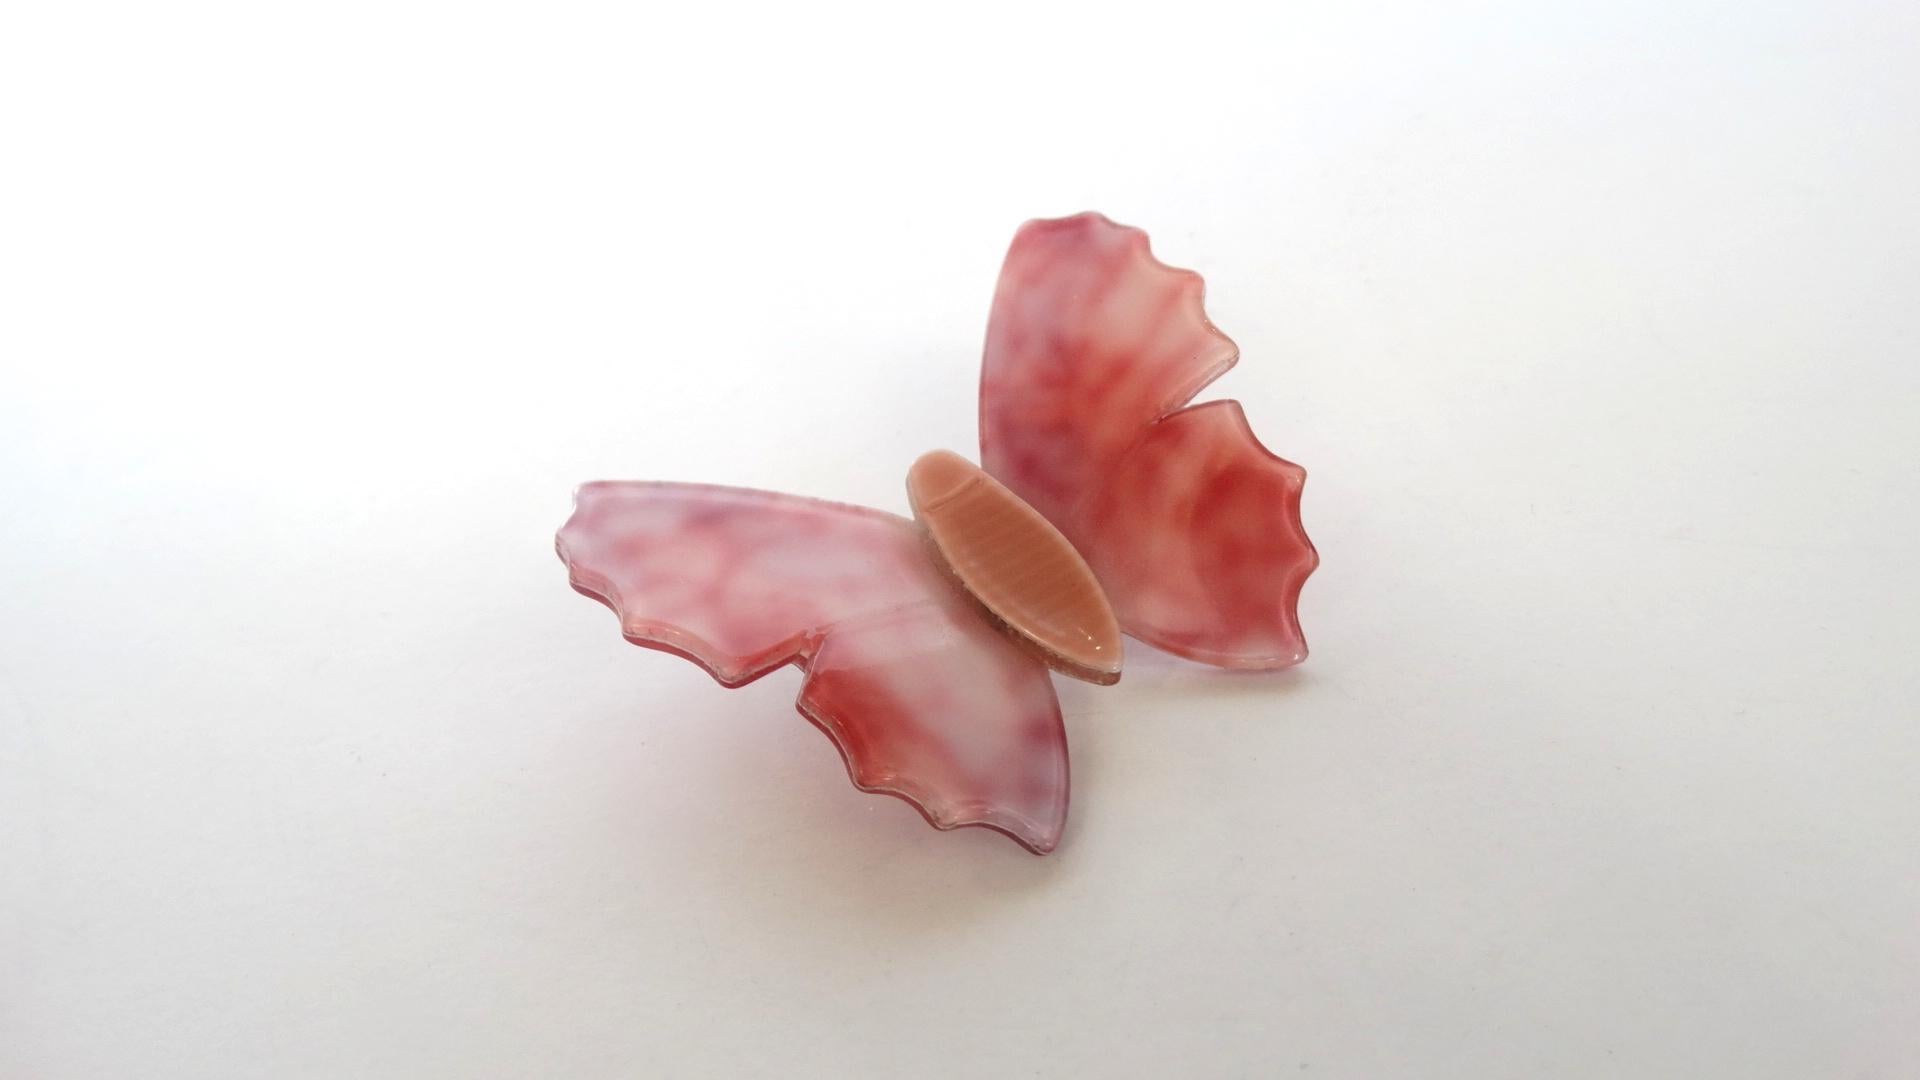 Brooches Are The New Hot Accessory This Season And We've Got You Covered! Circa 1970's, this Lea Stein butterfly brooch features an elegant marble effect in soft pinks. Simple cut out edging resembles the delicate details on a butterfly's wing. This